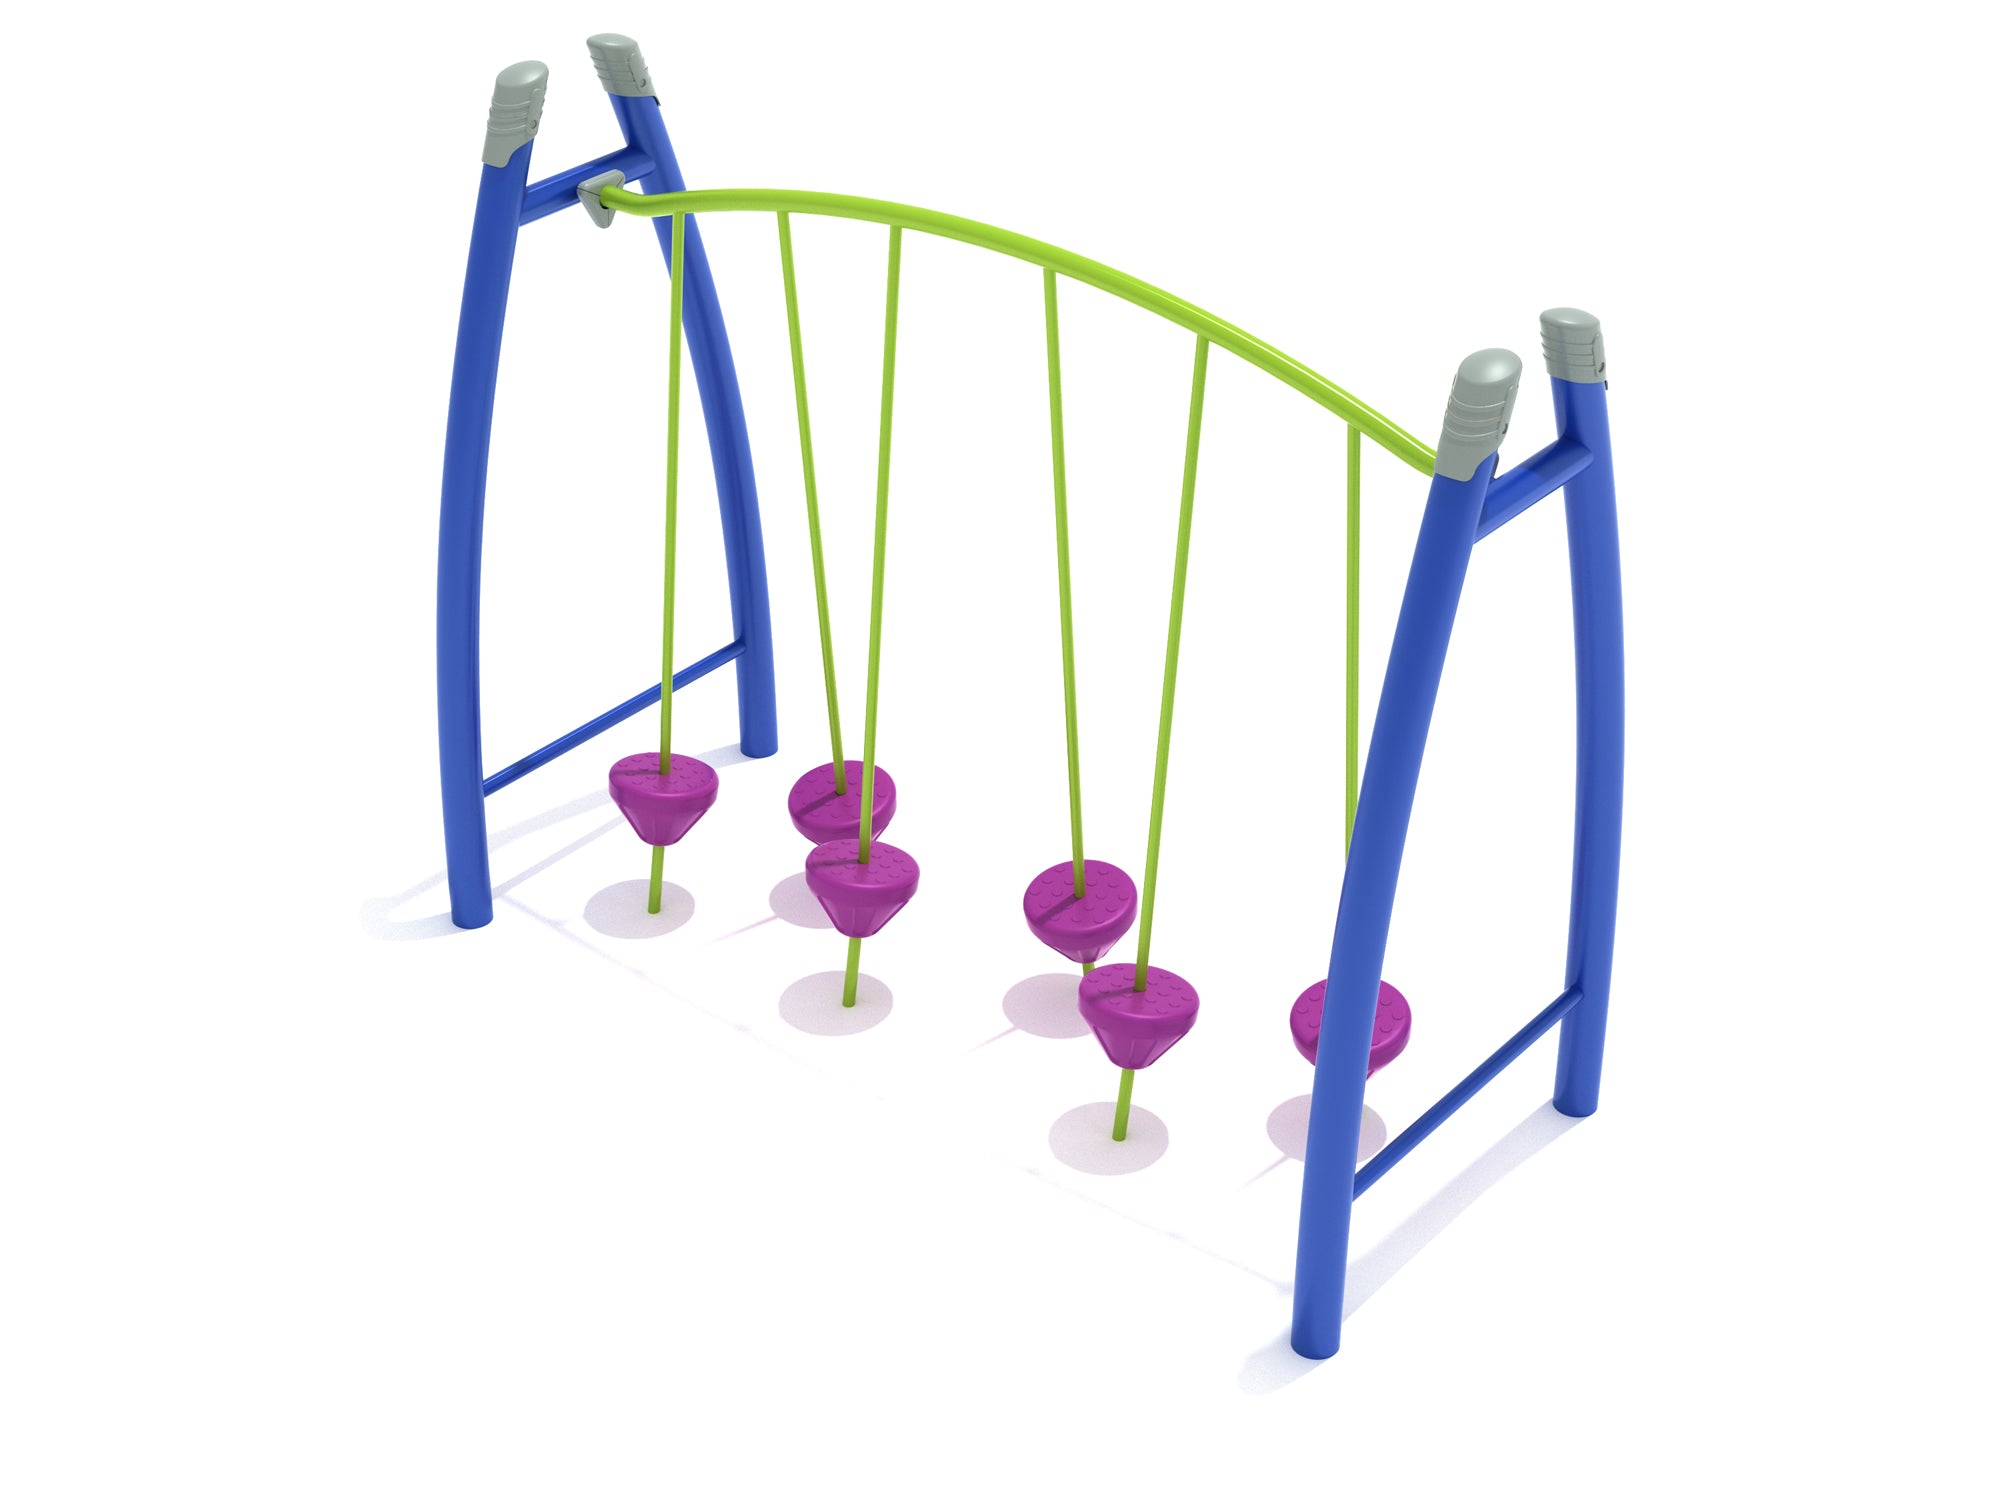 Playground-Equipment-Commercial-Curved-Post-Tilted-Pebble-Bridge